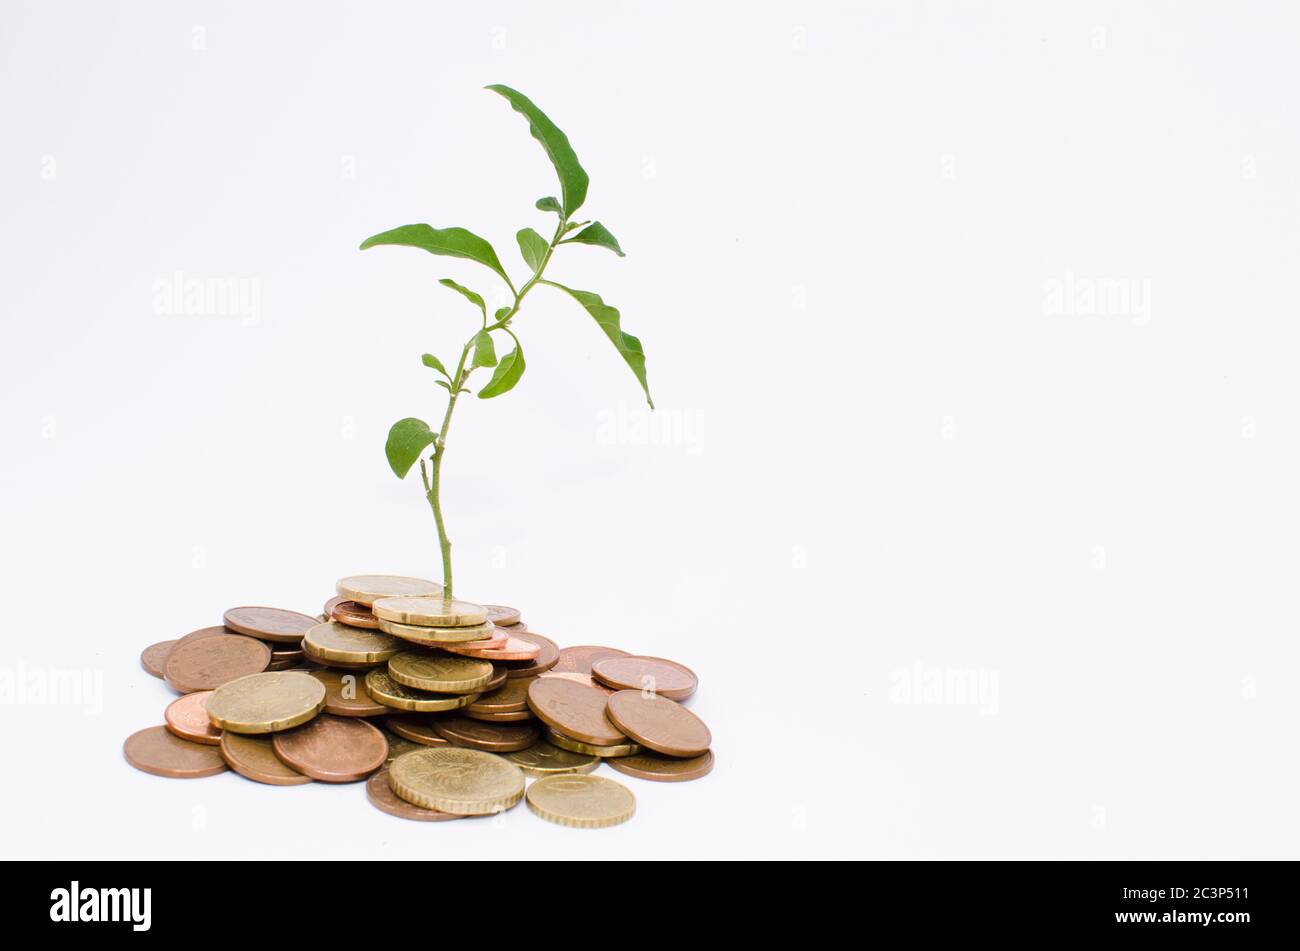 nascent plant of a mountain of coins Stock Photo